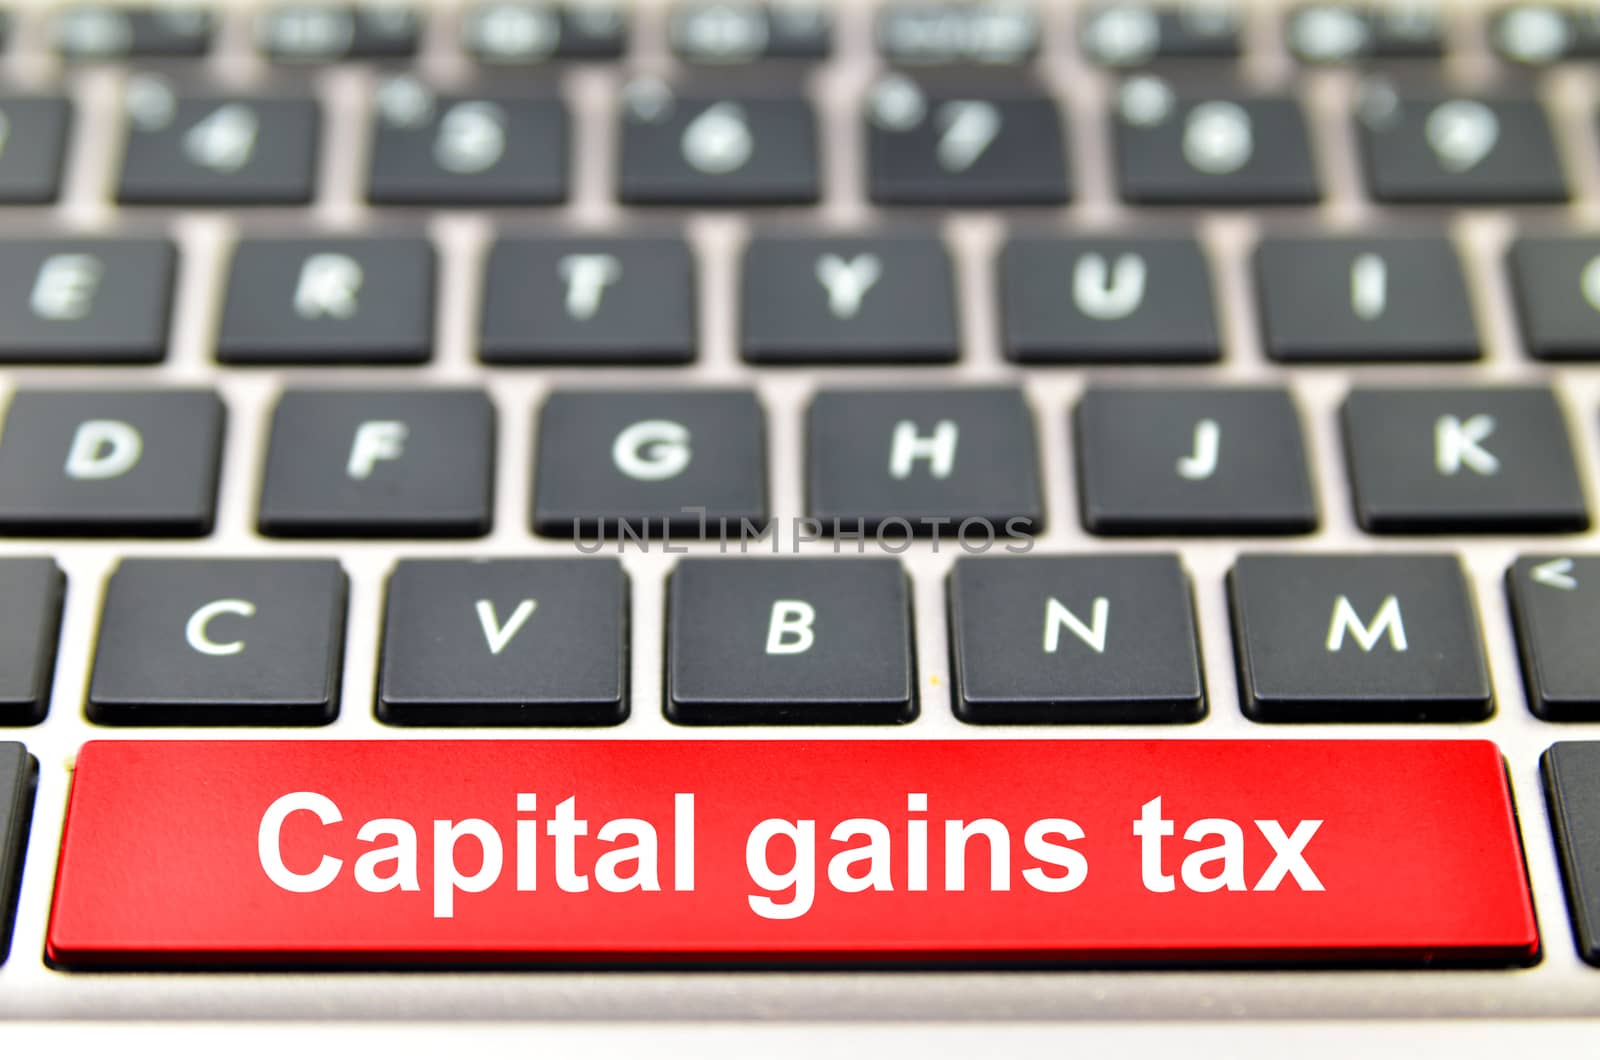 Capital gains tax word on computer space bar by tang90246